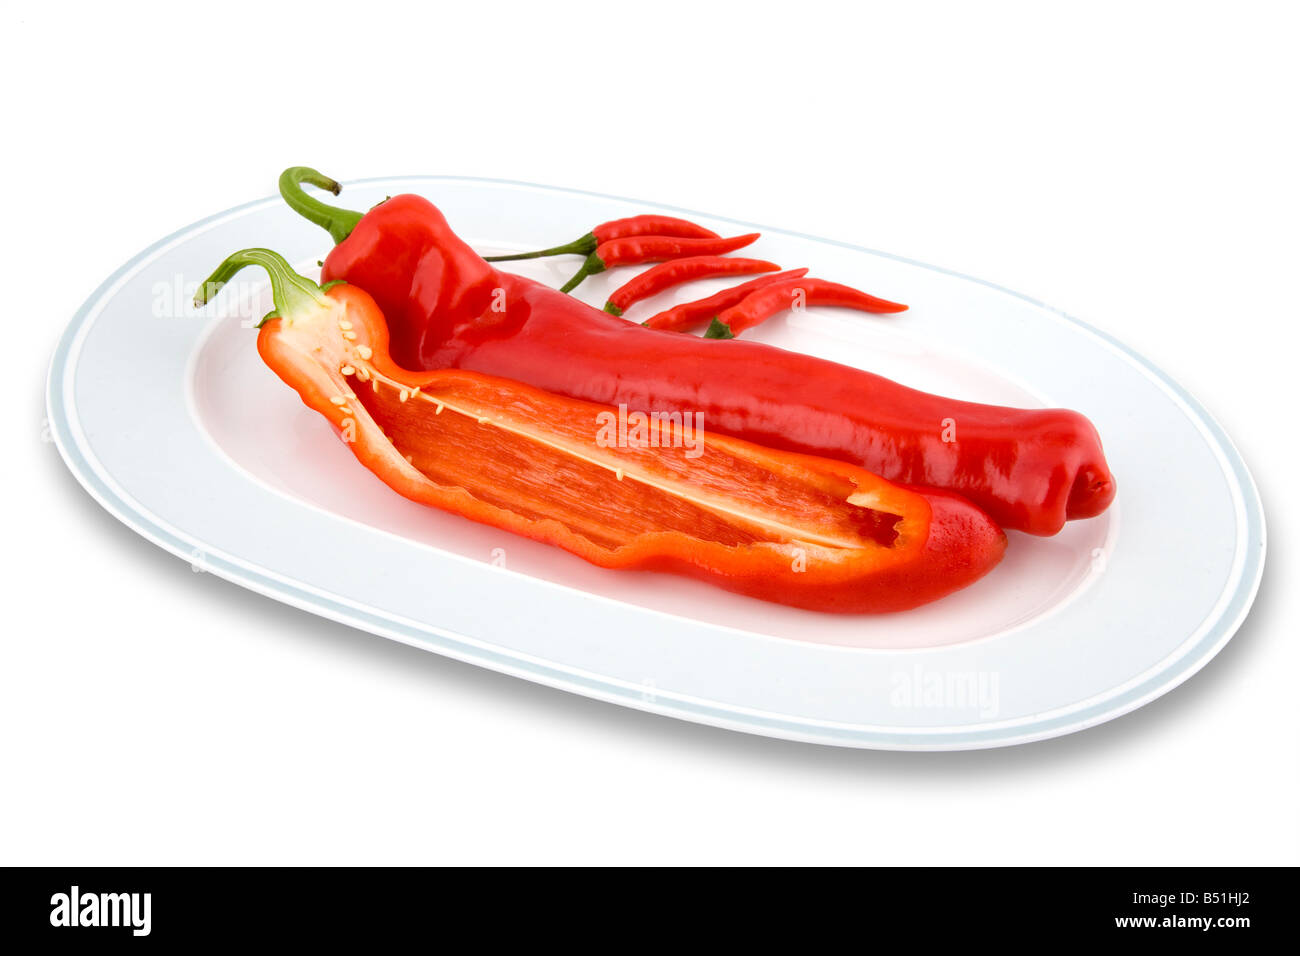 Red Chili peppers Stock Photo